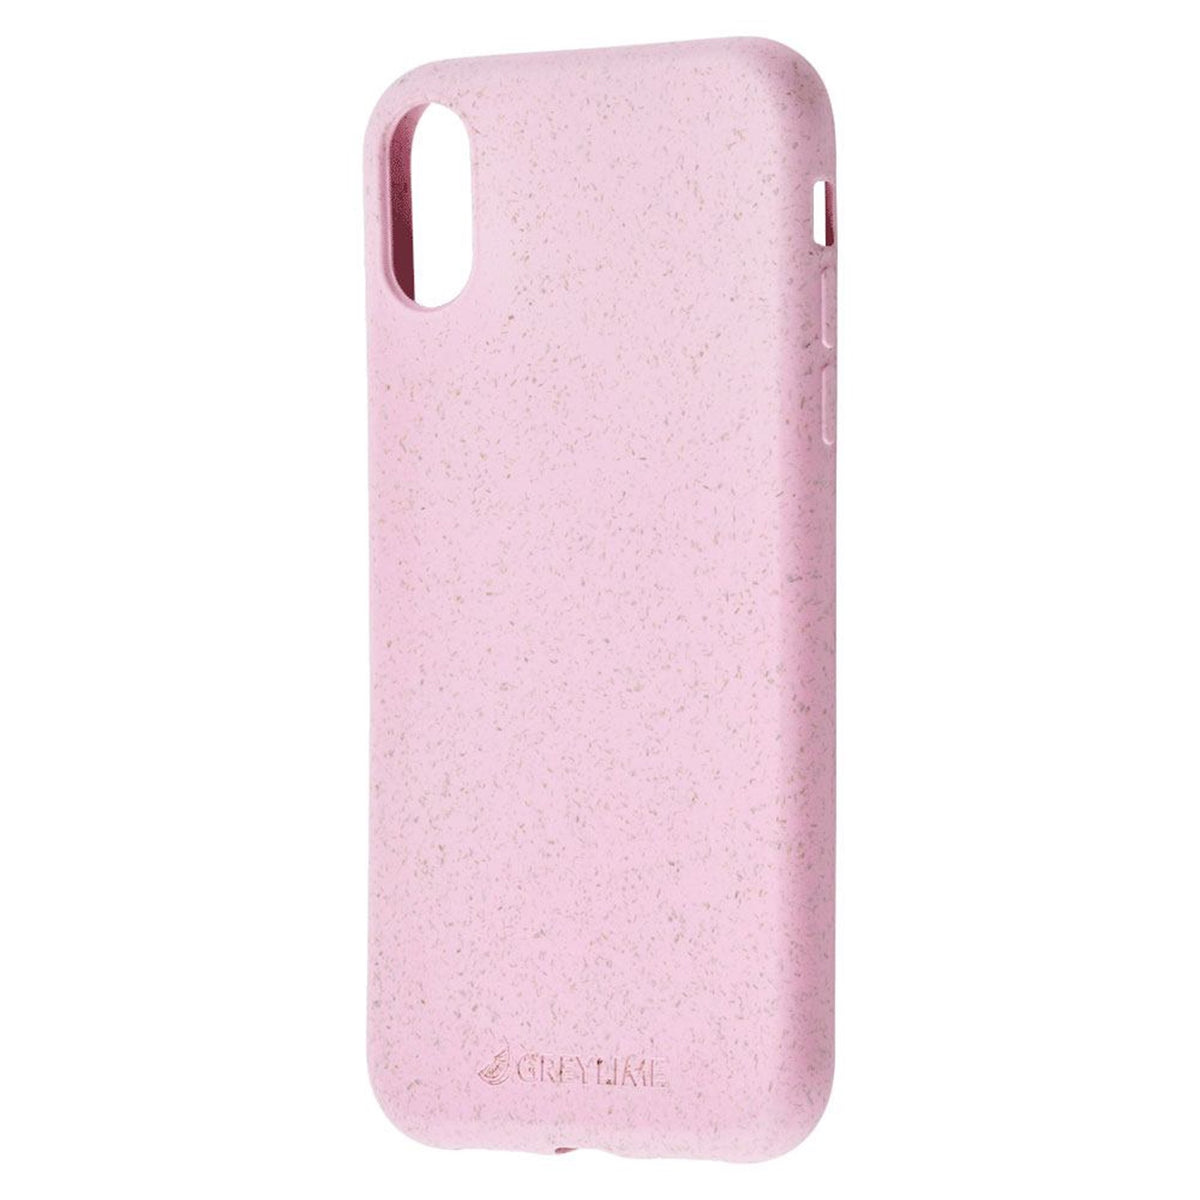 GreyLime-iPhone-XR-biodegradable-cover-Pink-COIPXR05-V2.jpg